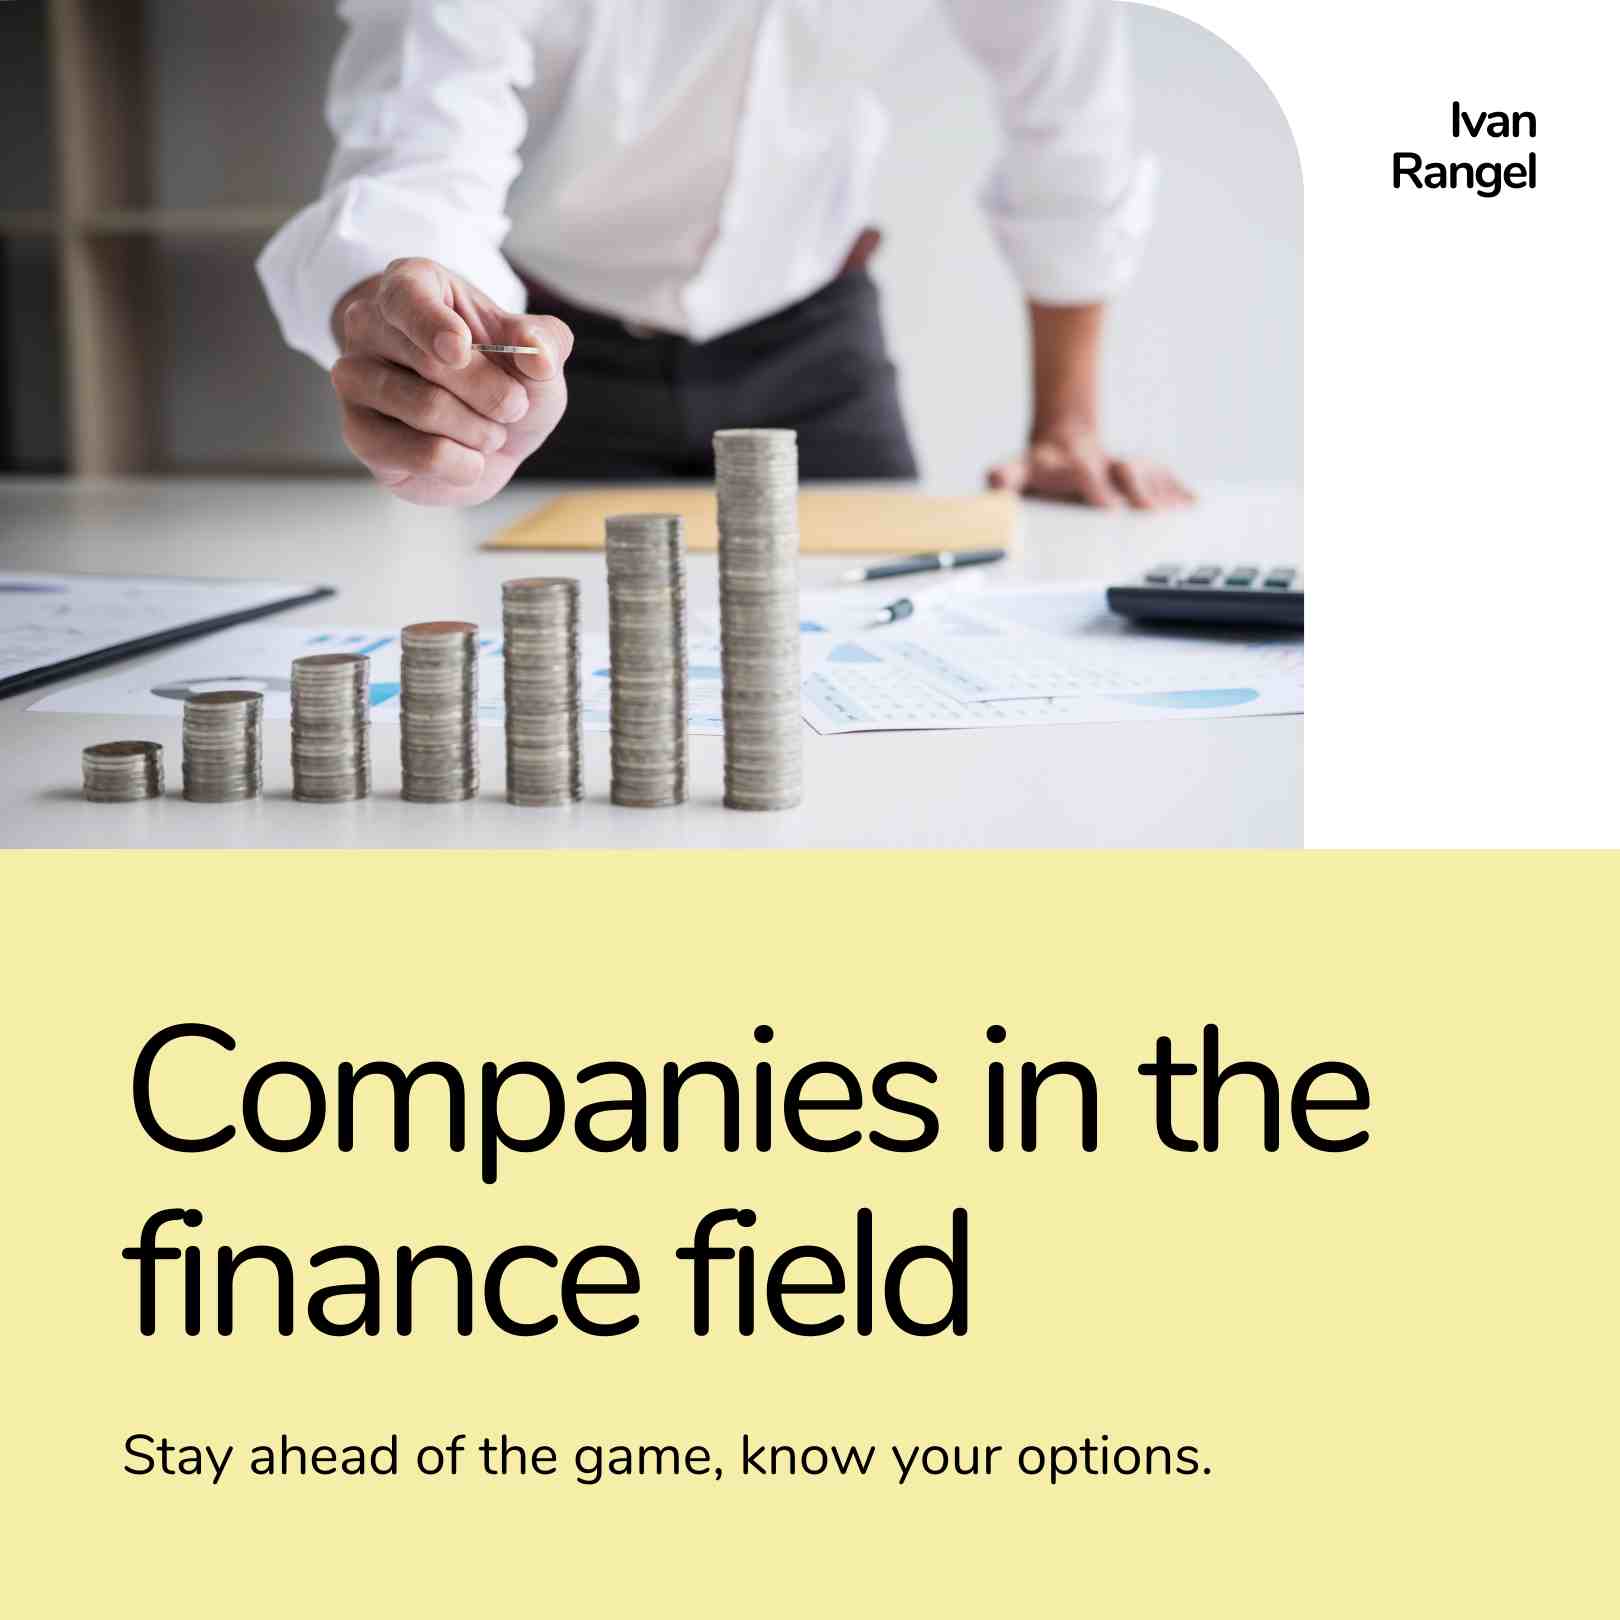 What Companies Are In the Finance Field?